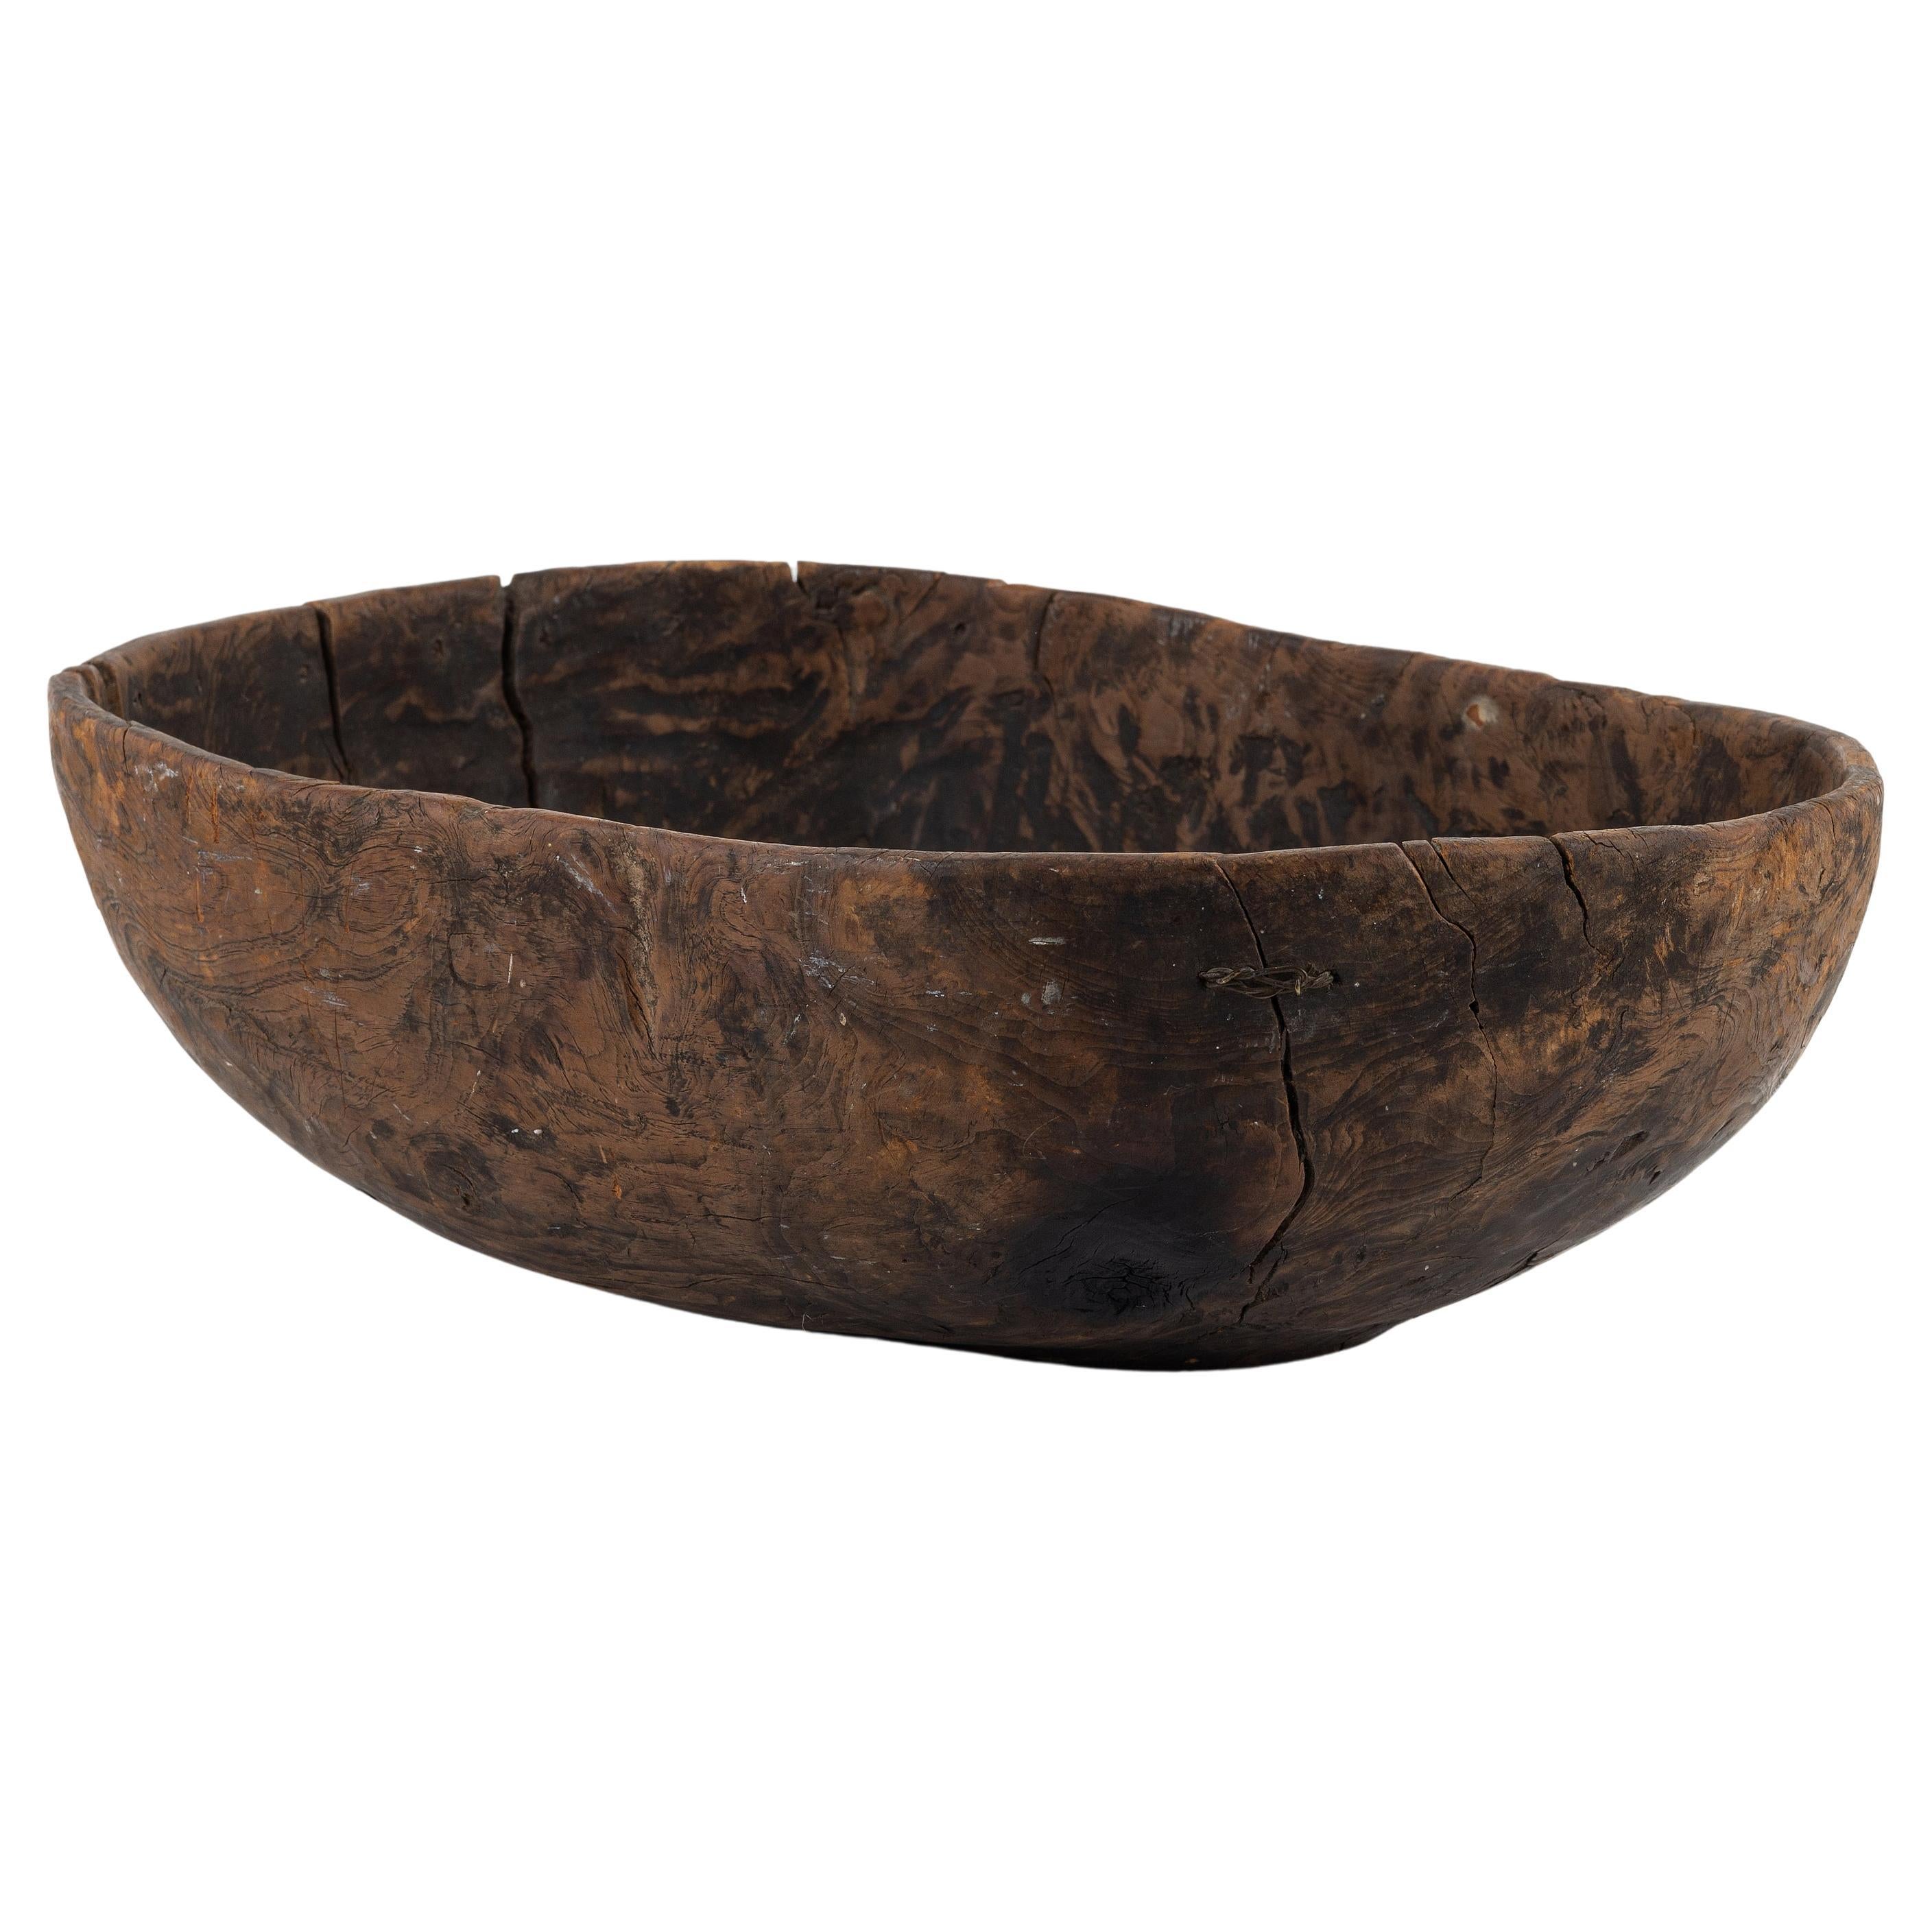 Rare Swedish Wooden Bowl in Birch Wood and Wabi Sabi Style Produced 1793 For Sale